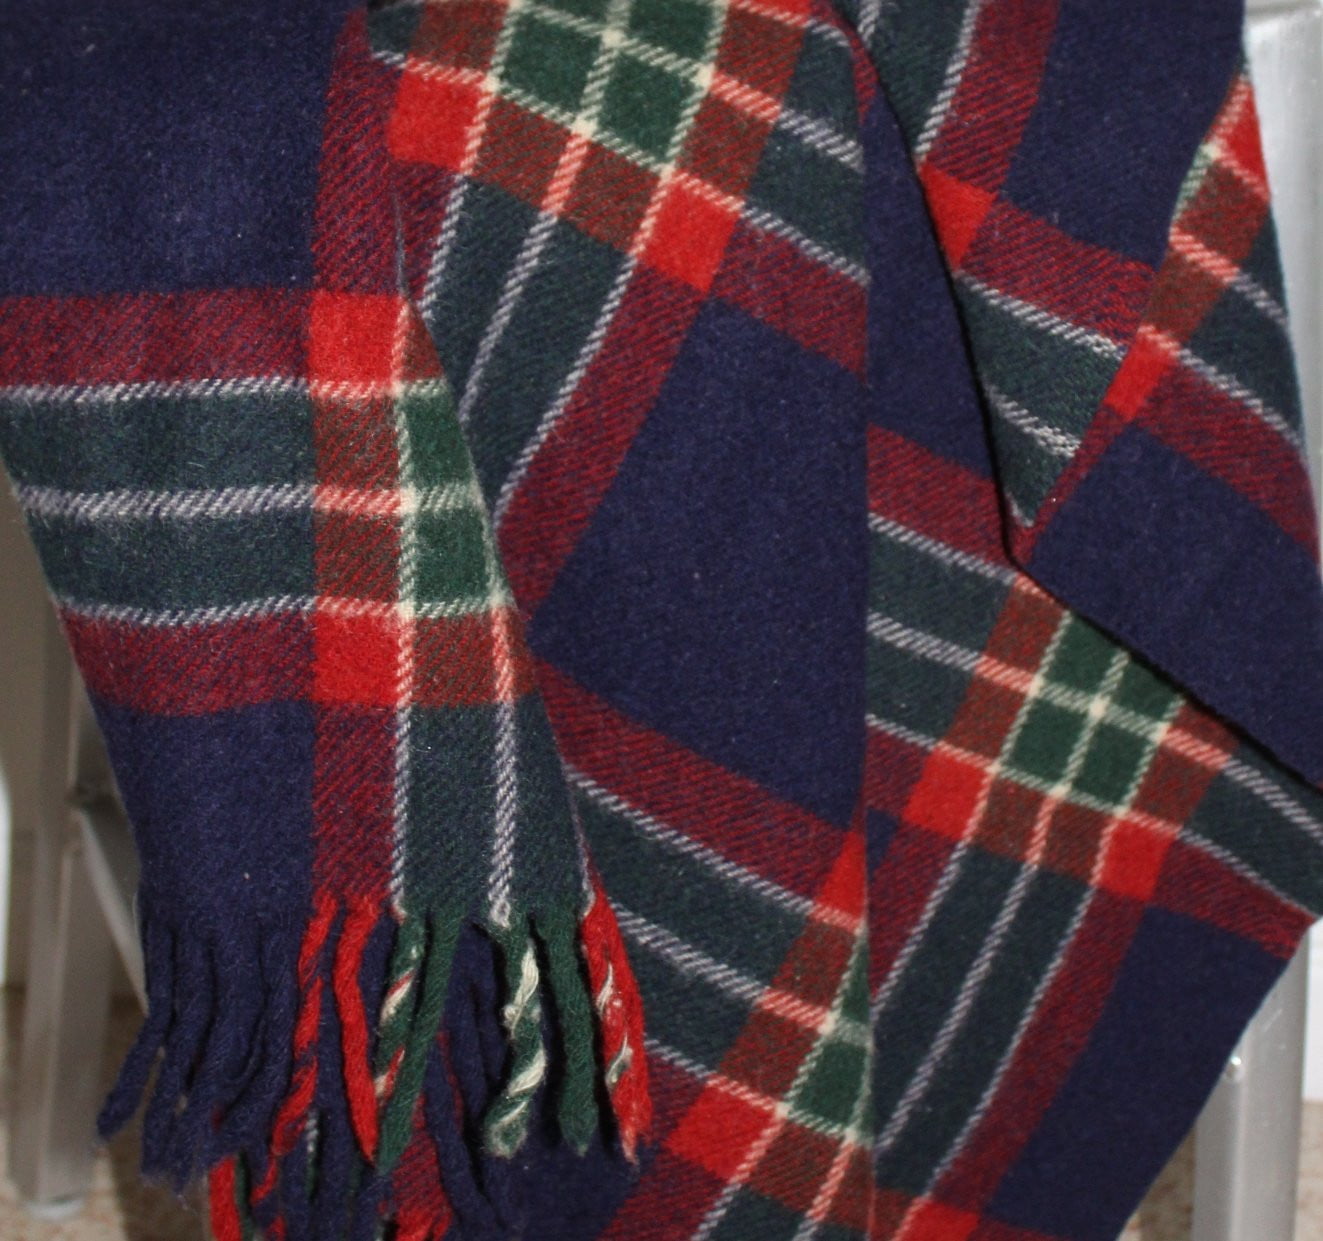 Vintage Plaid Wool Throw Vibrant Red Navy Blue Forest Green warm soft